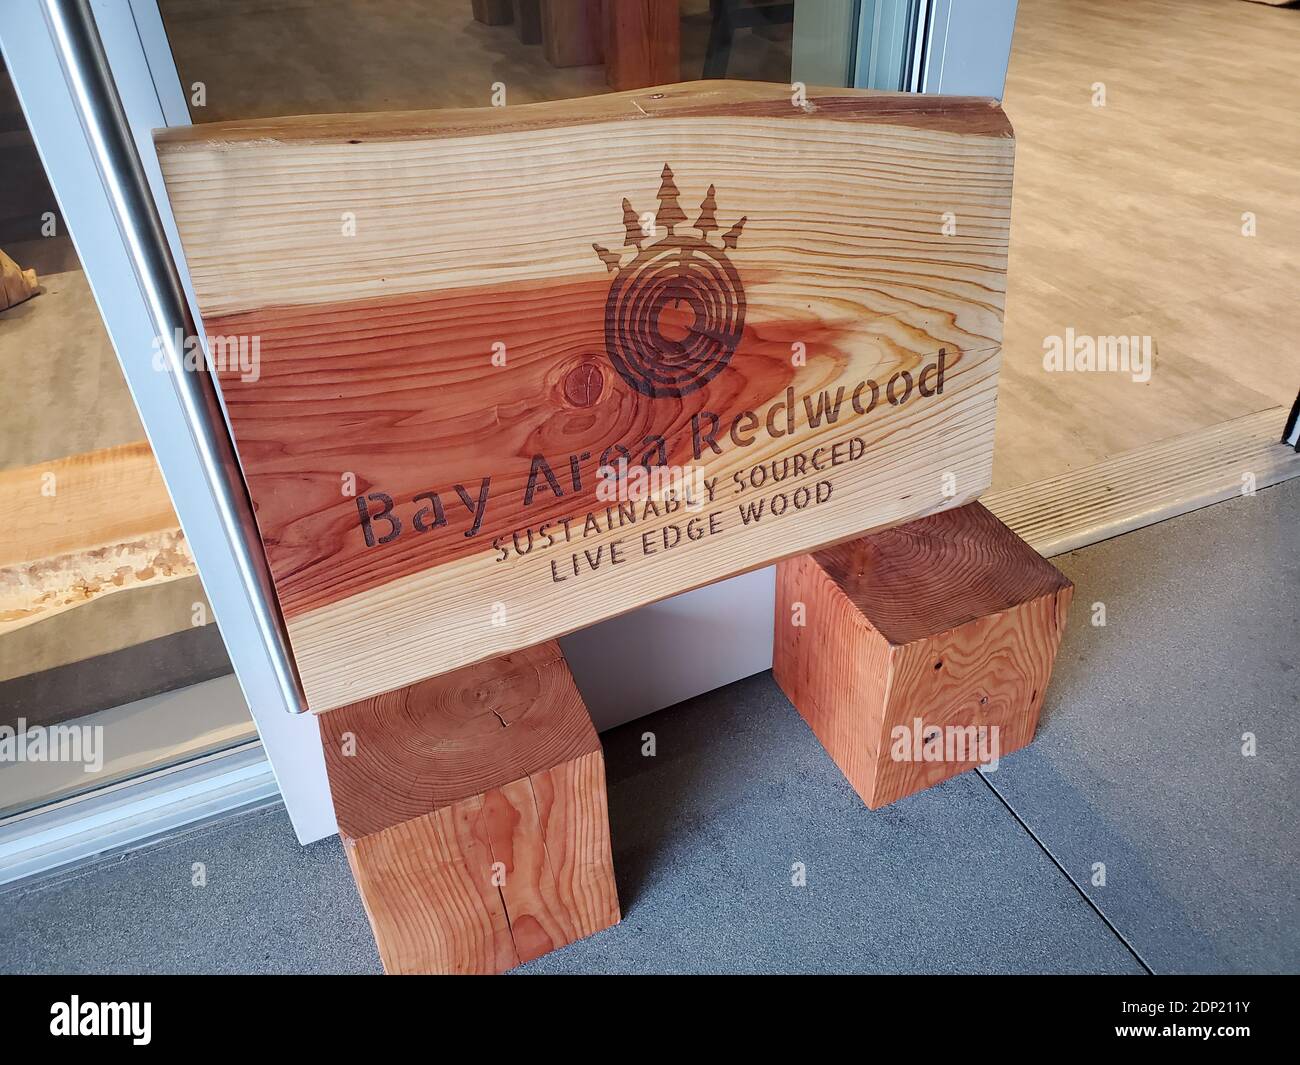 Close-up shot of a wooden sign featuring the logo for the Bay Area Redwood furniture store in San Ramon, California, December 5, 2020. () Stock Photo